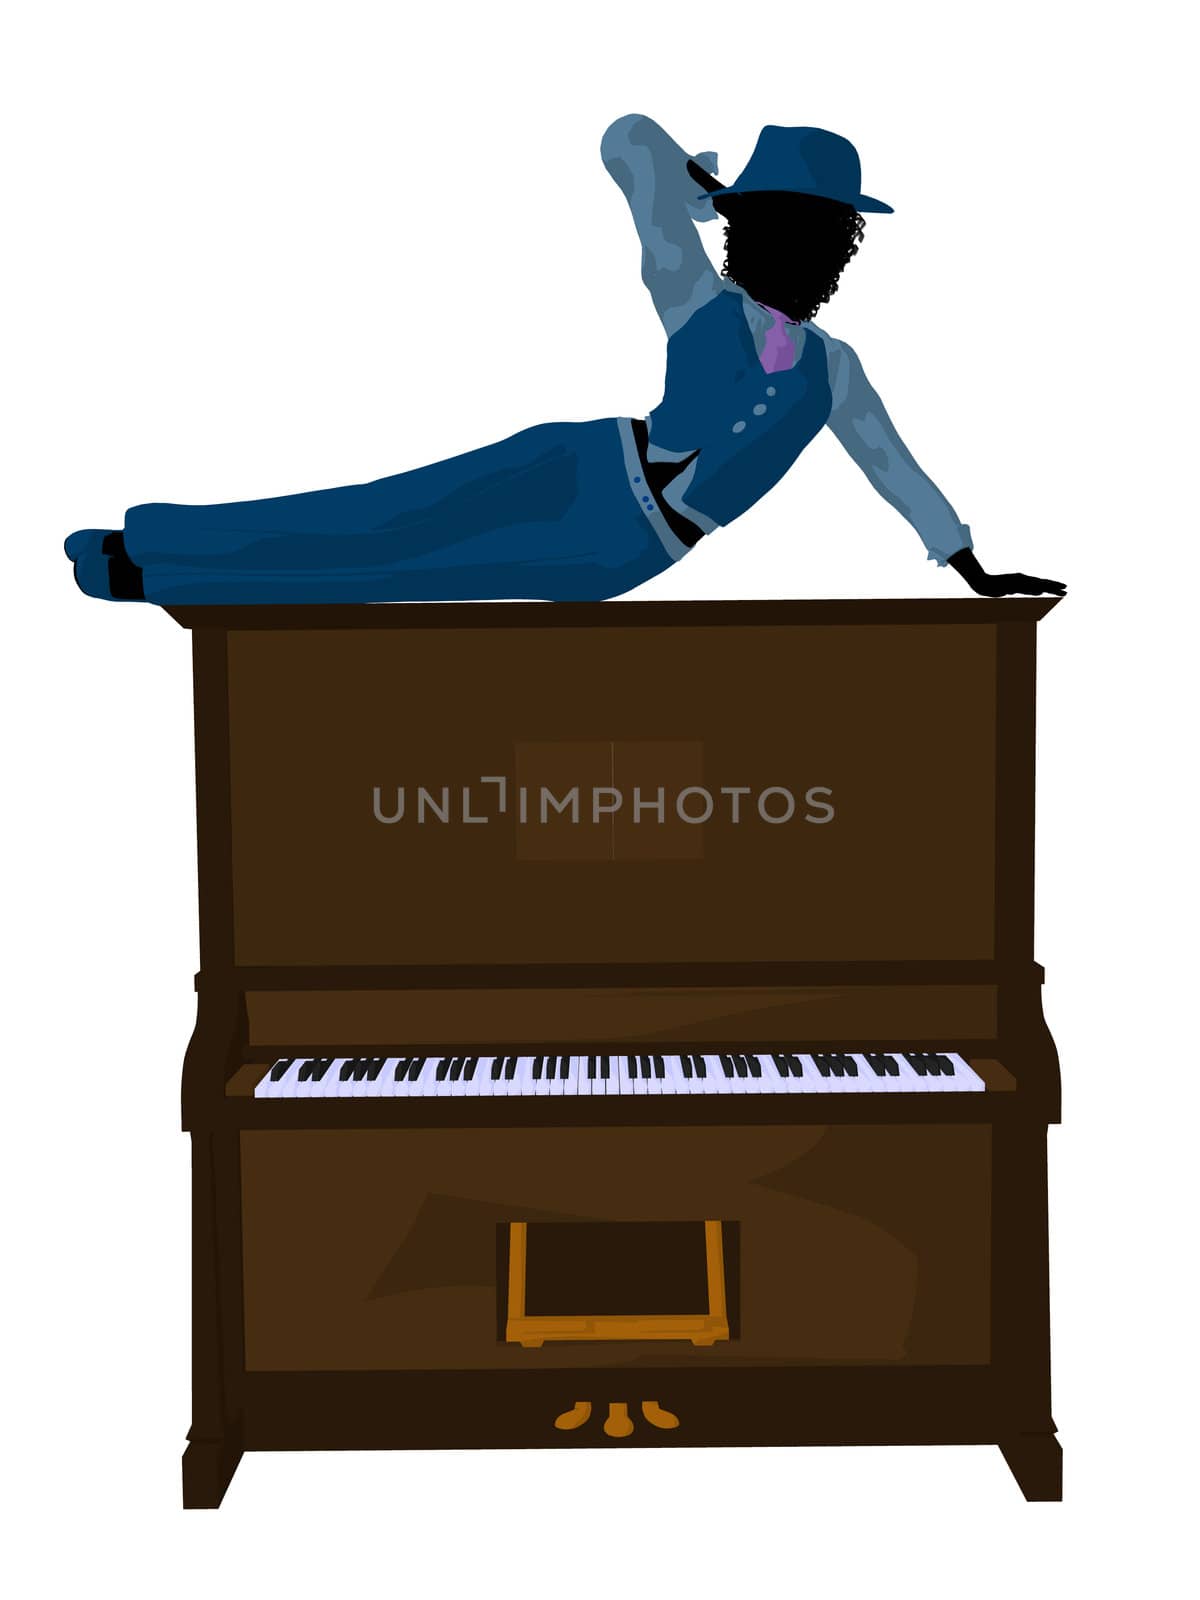 African american jazz musician on a piano on a white background